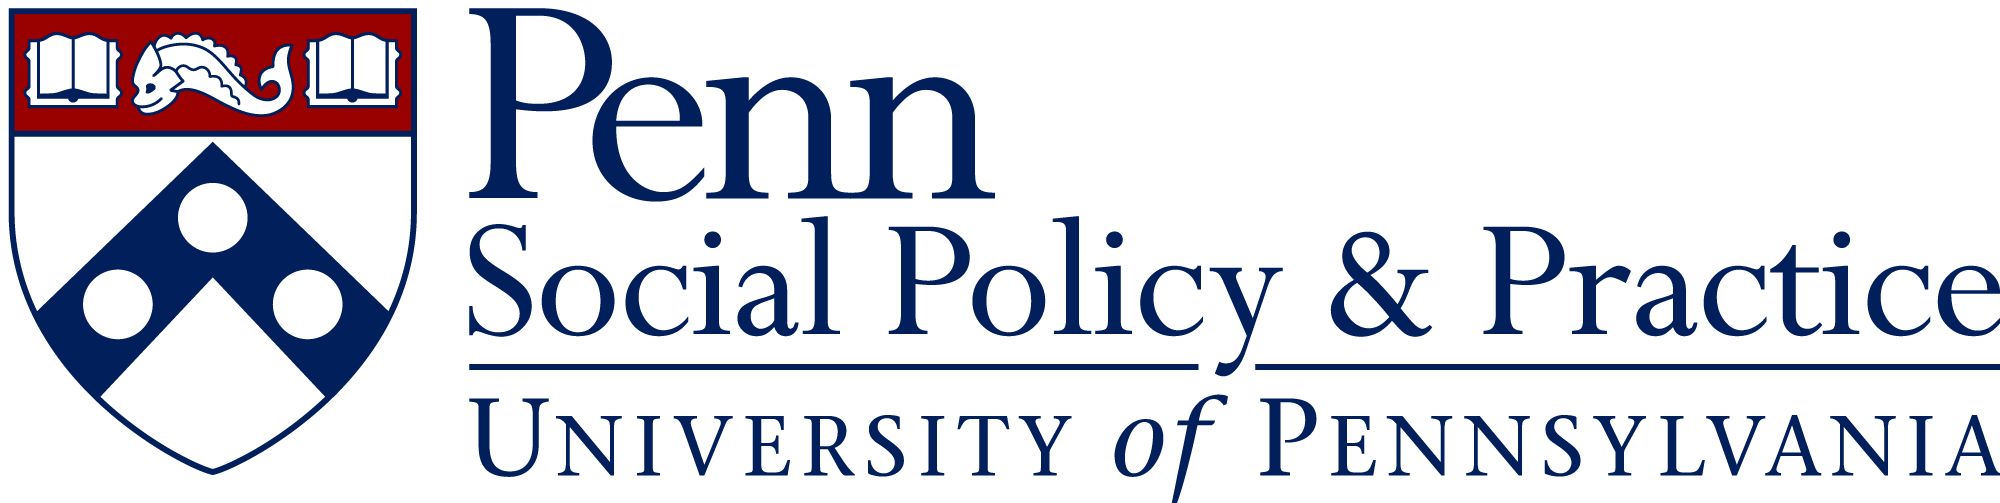 Penn Social Policy and Practice